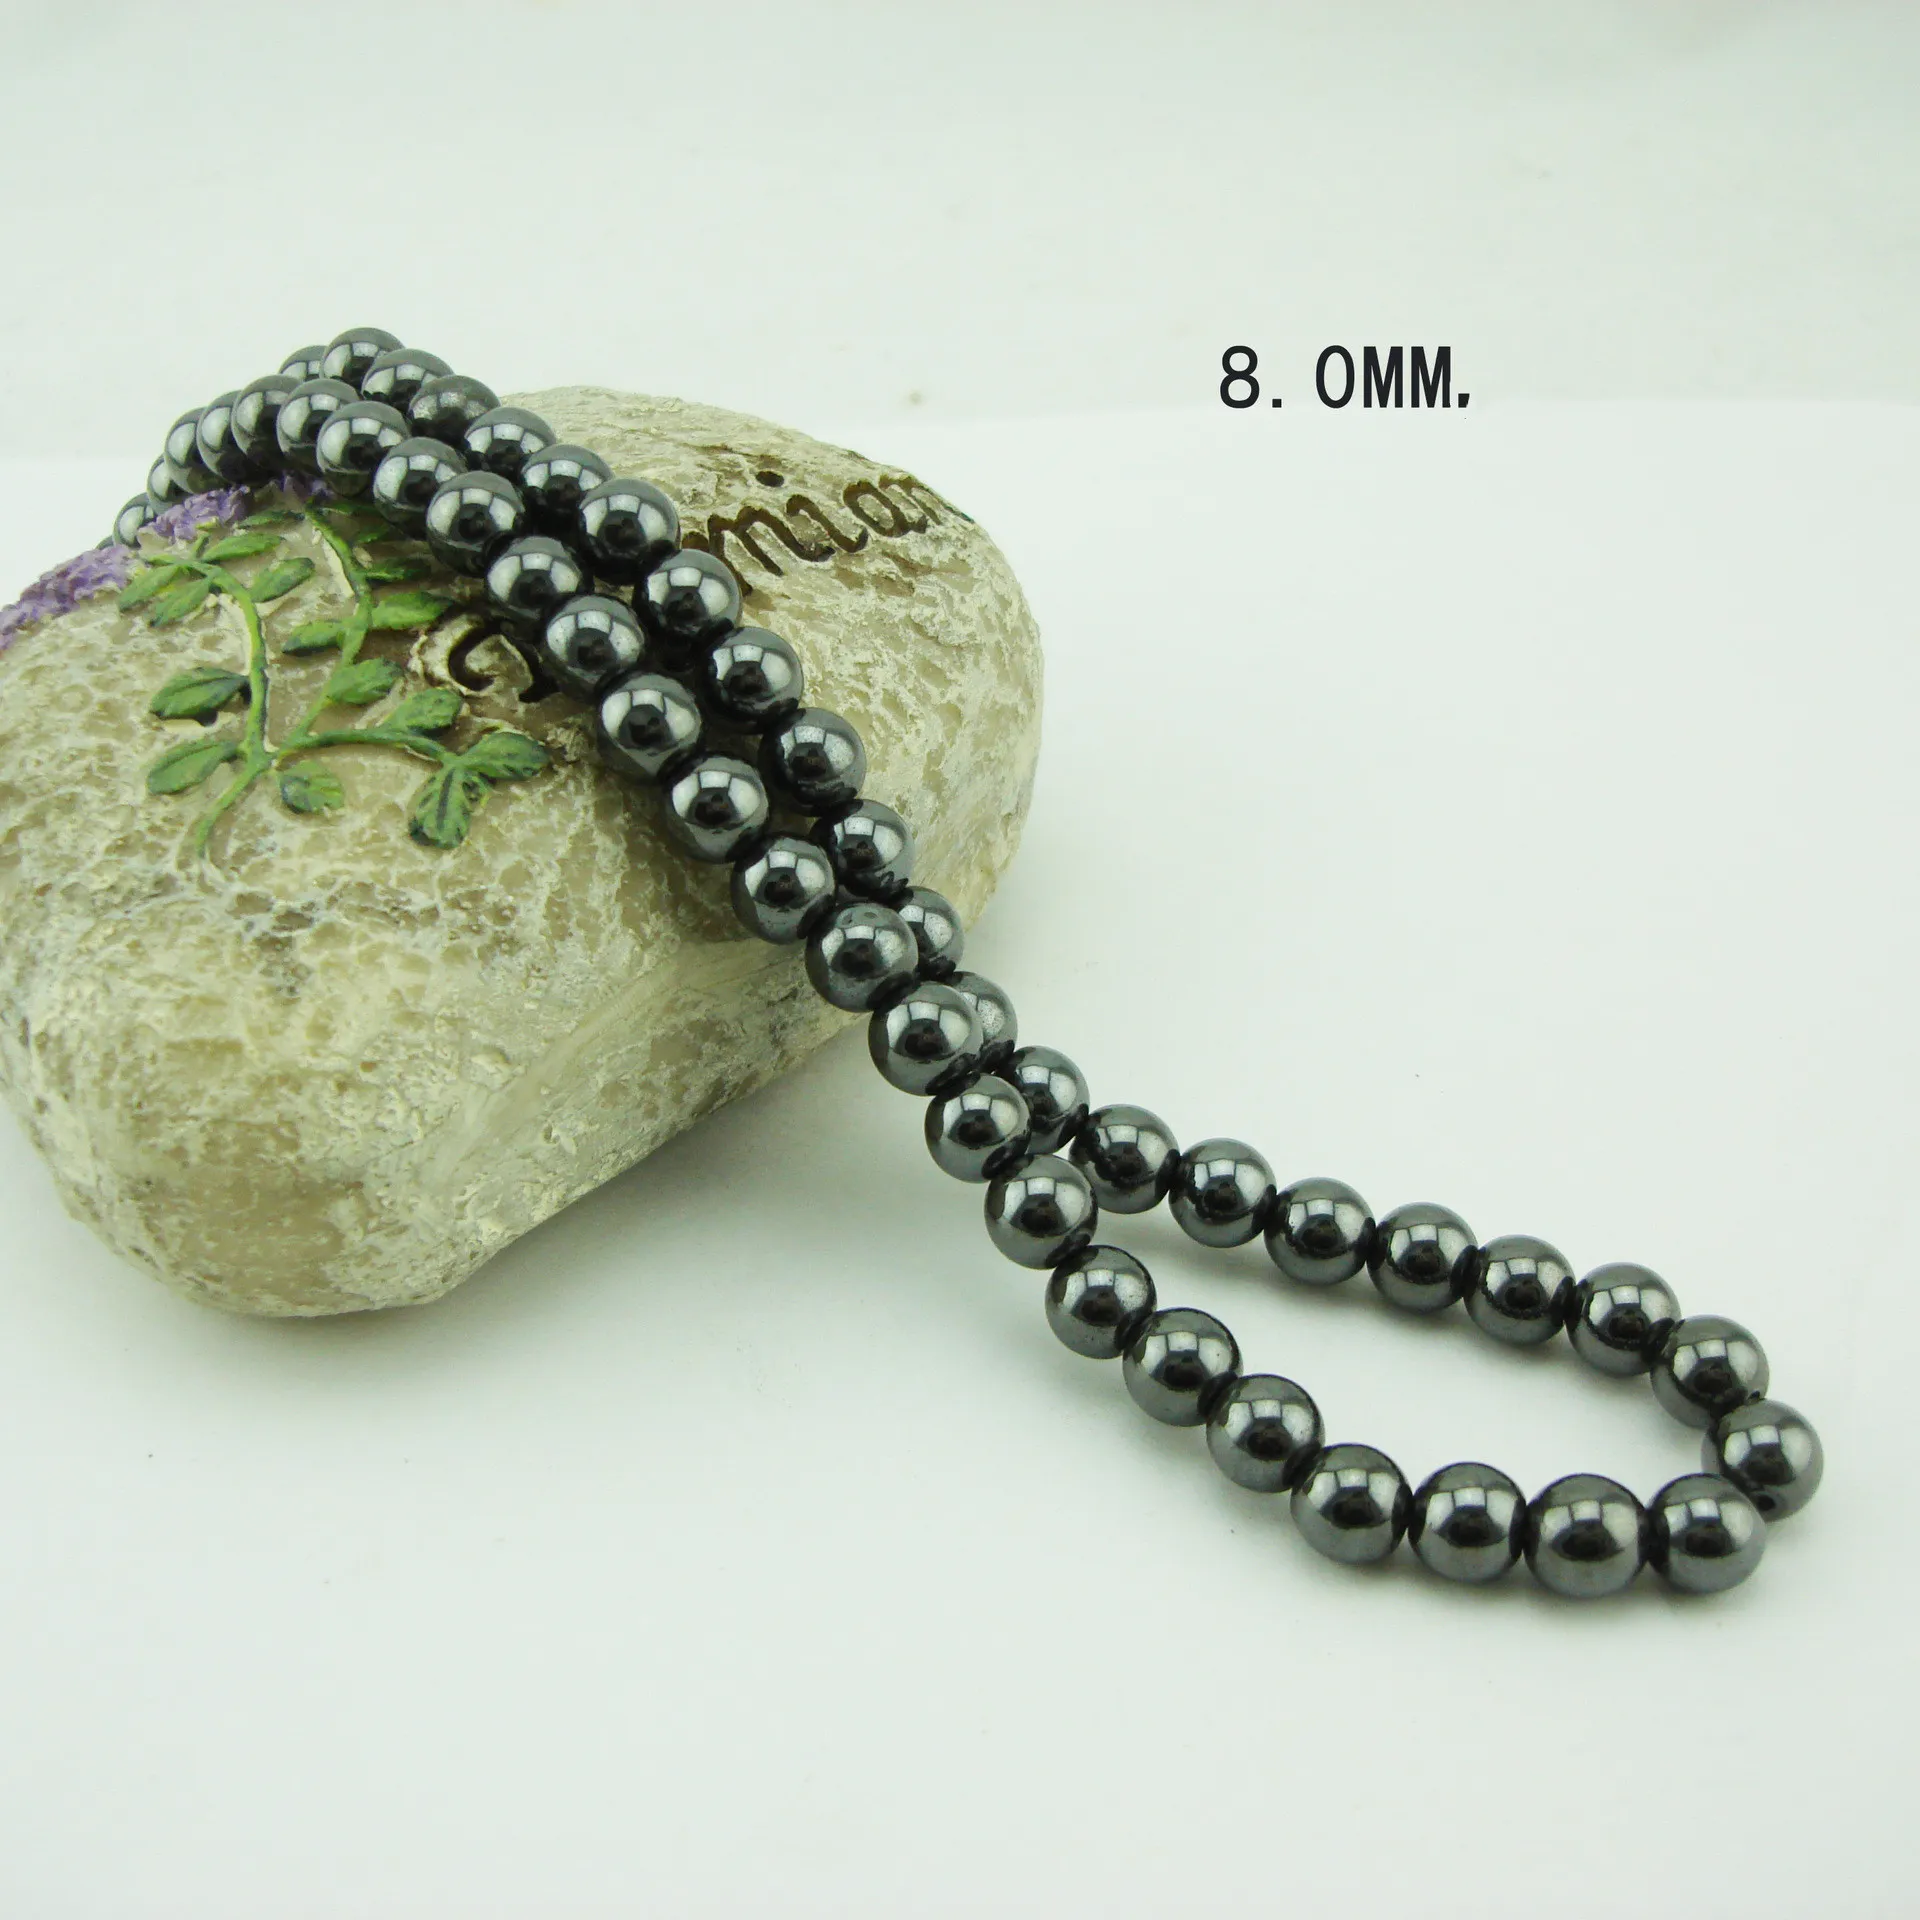 Buy the Mens Hematite and Gray Marble Necklace | JaeBee Jewelry